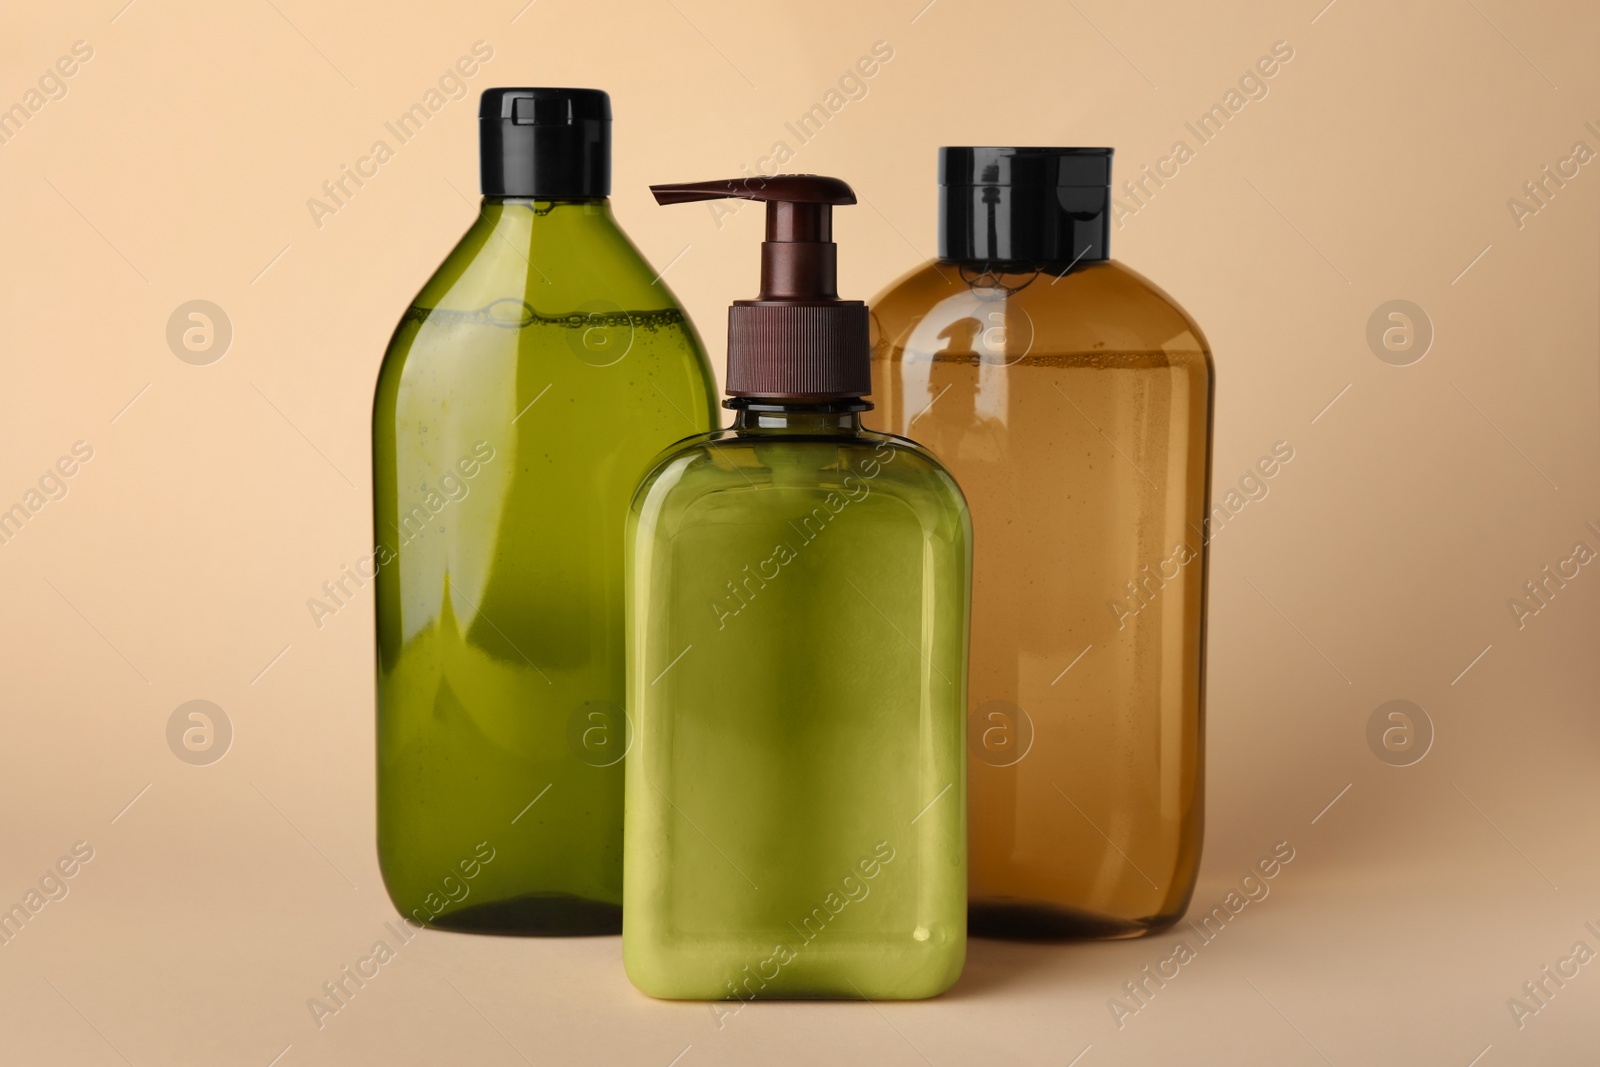 Photo of Different bottles of shampoo on beige background